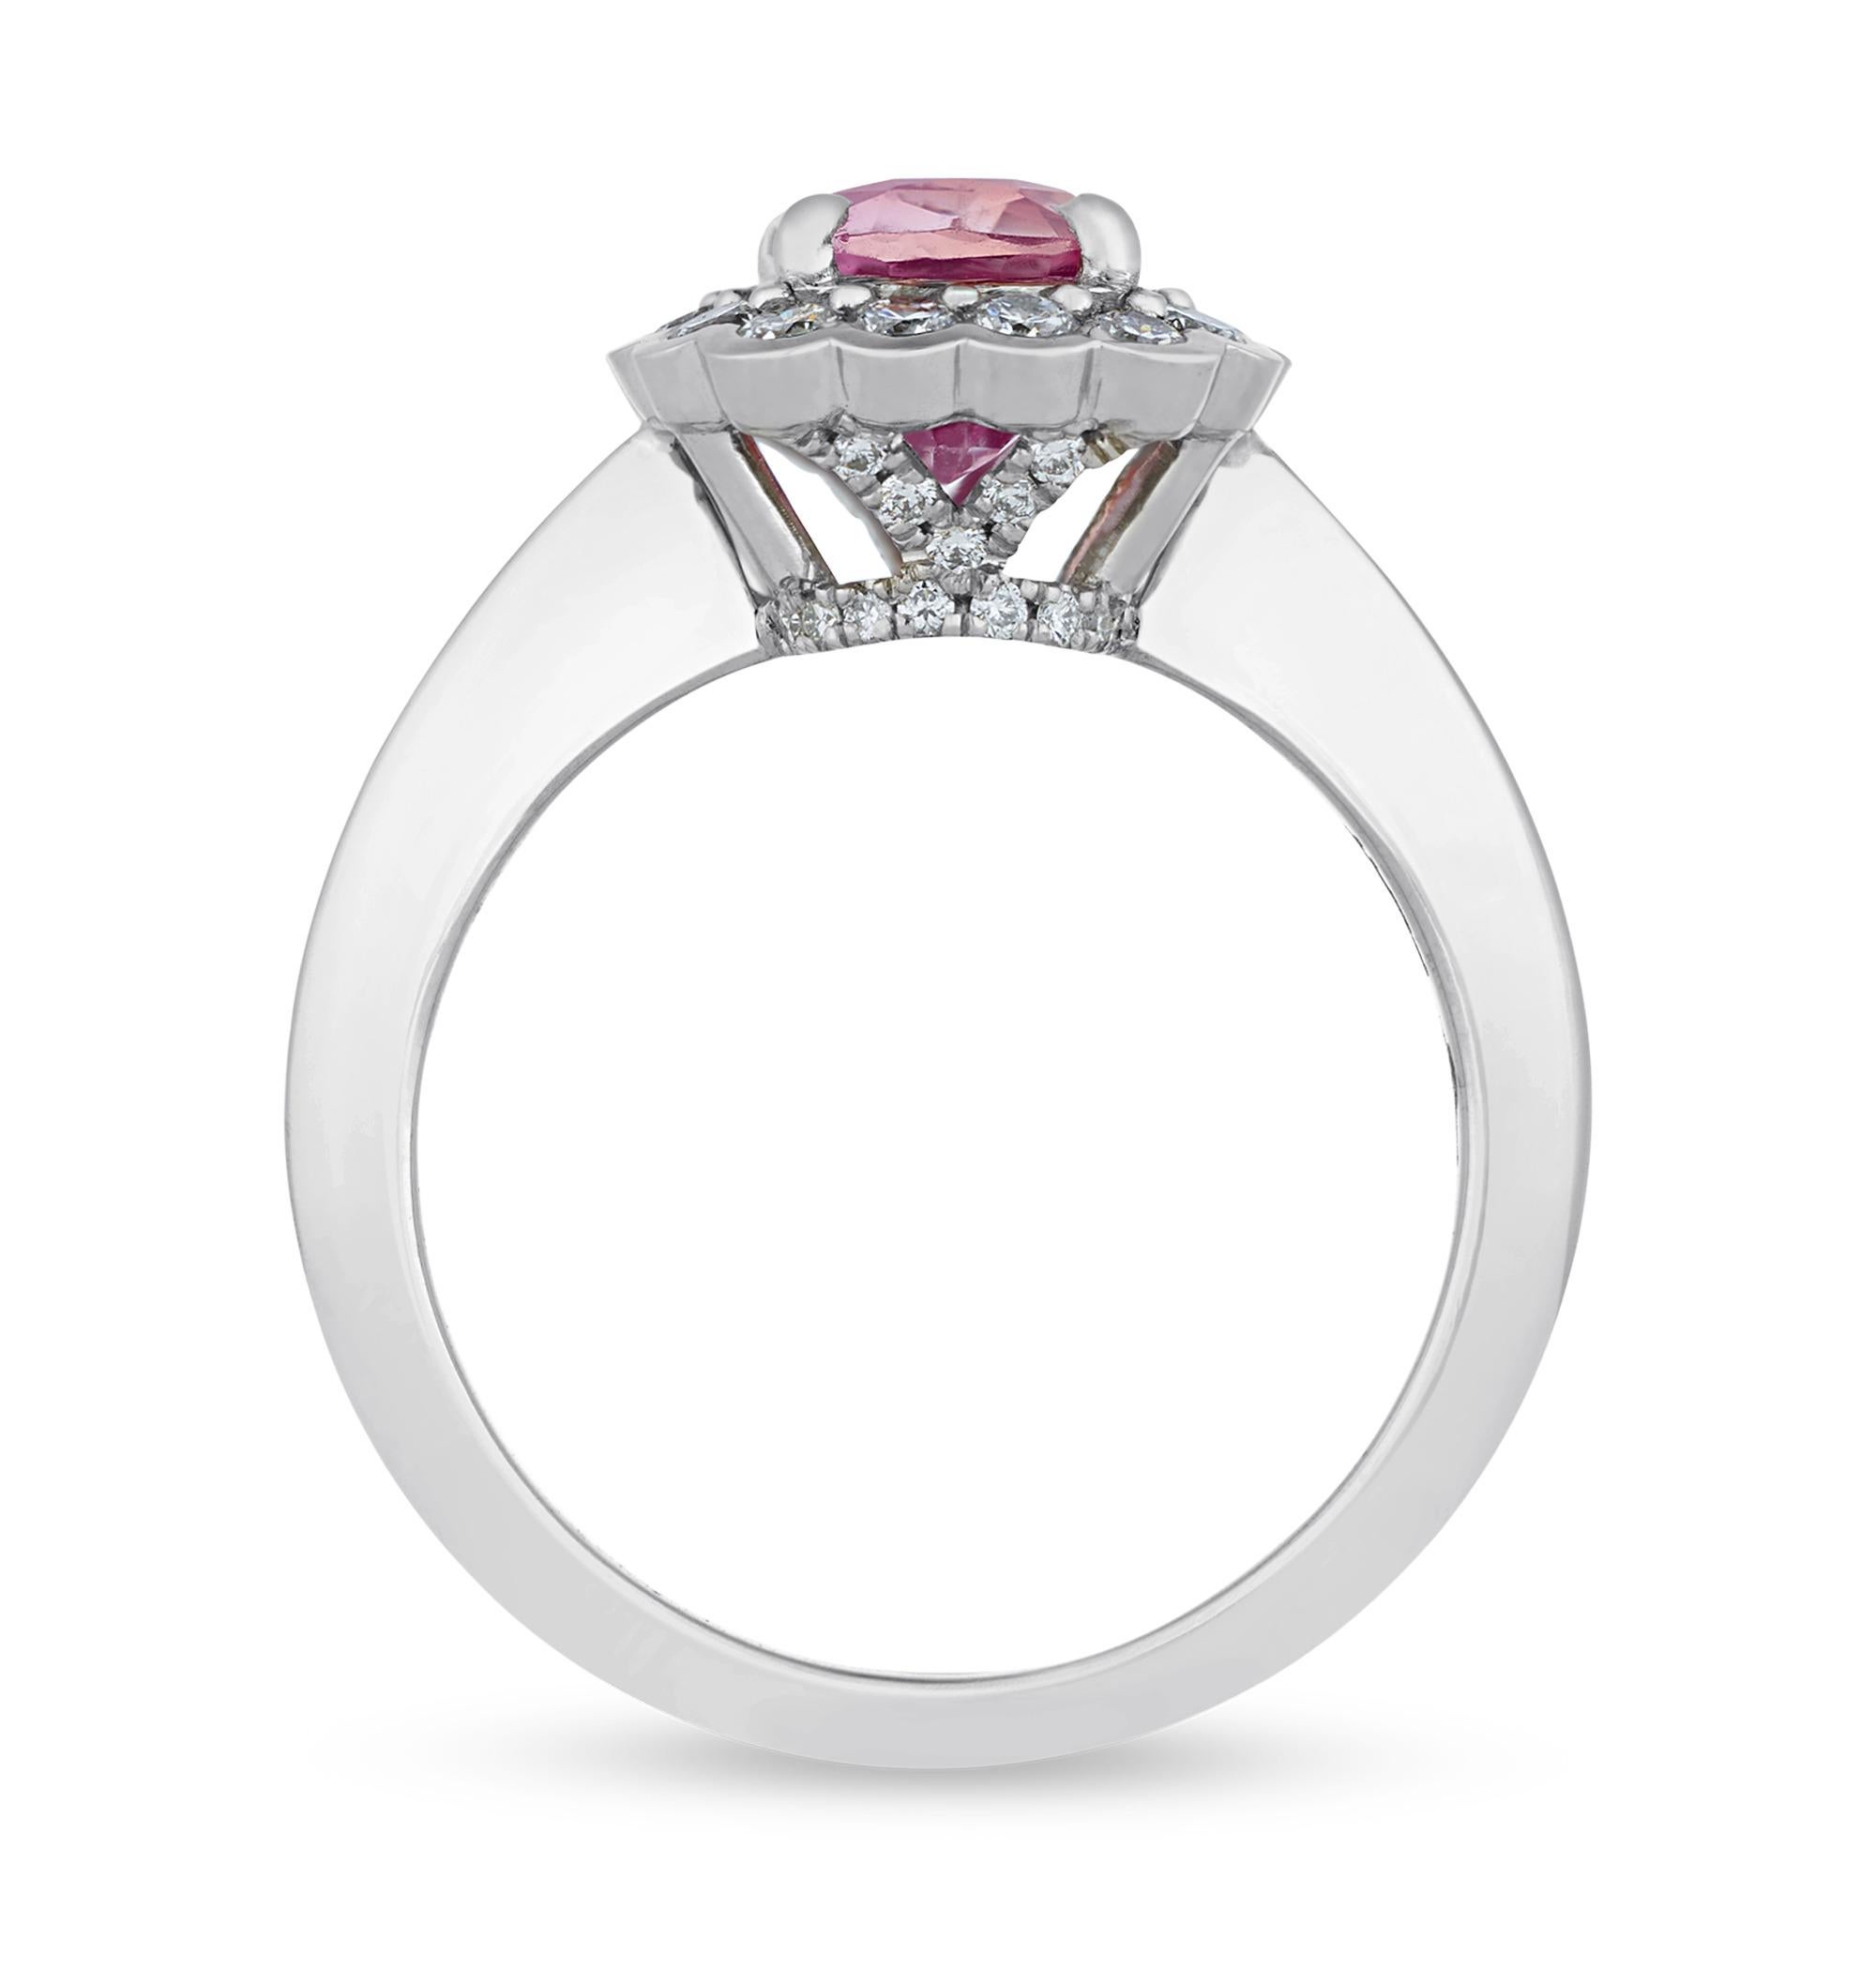 The unique color of the Padparadscha sapphire is perfectly showcased in this 2.06-carat ring. The captivating jewel displays the superb orangy-pink color for which these stones are so coveted. The cushion-cut sapphire is certified by the Gemological